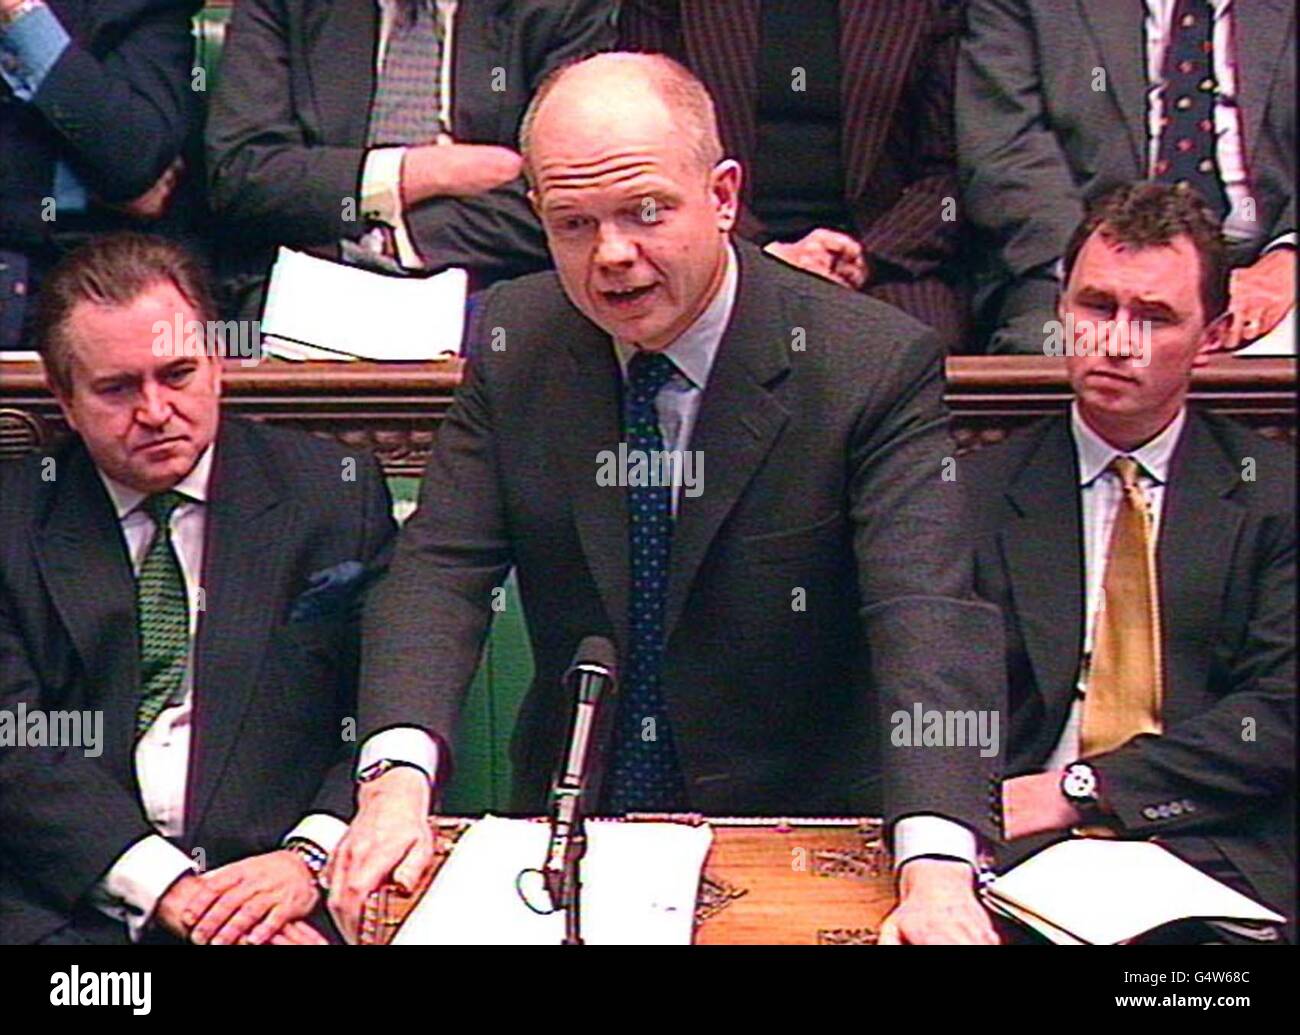 Oppostion leader William Hague questions Prime Minister Tony Blair, during Prime Minister's Questions in the House of Commons. Stock Photo